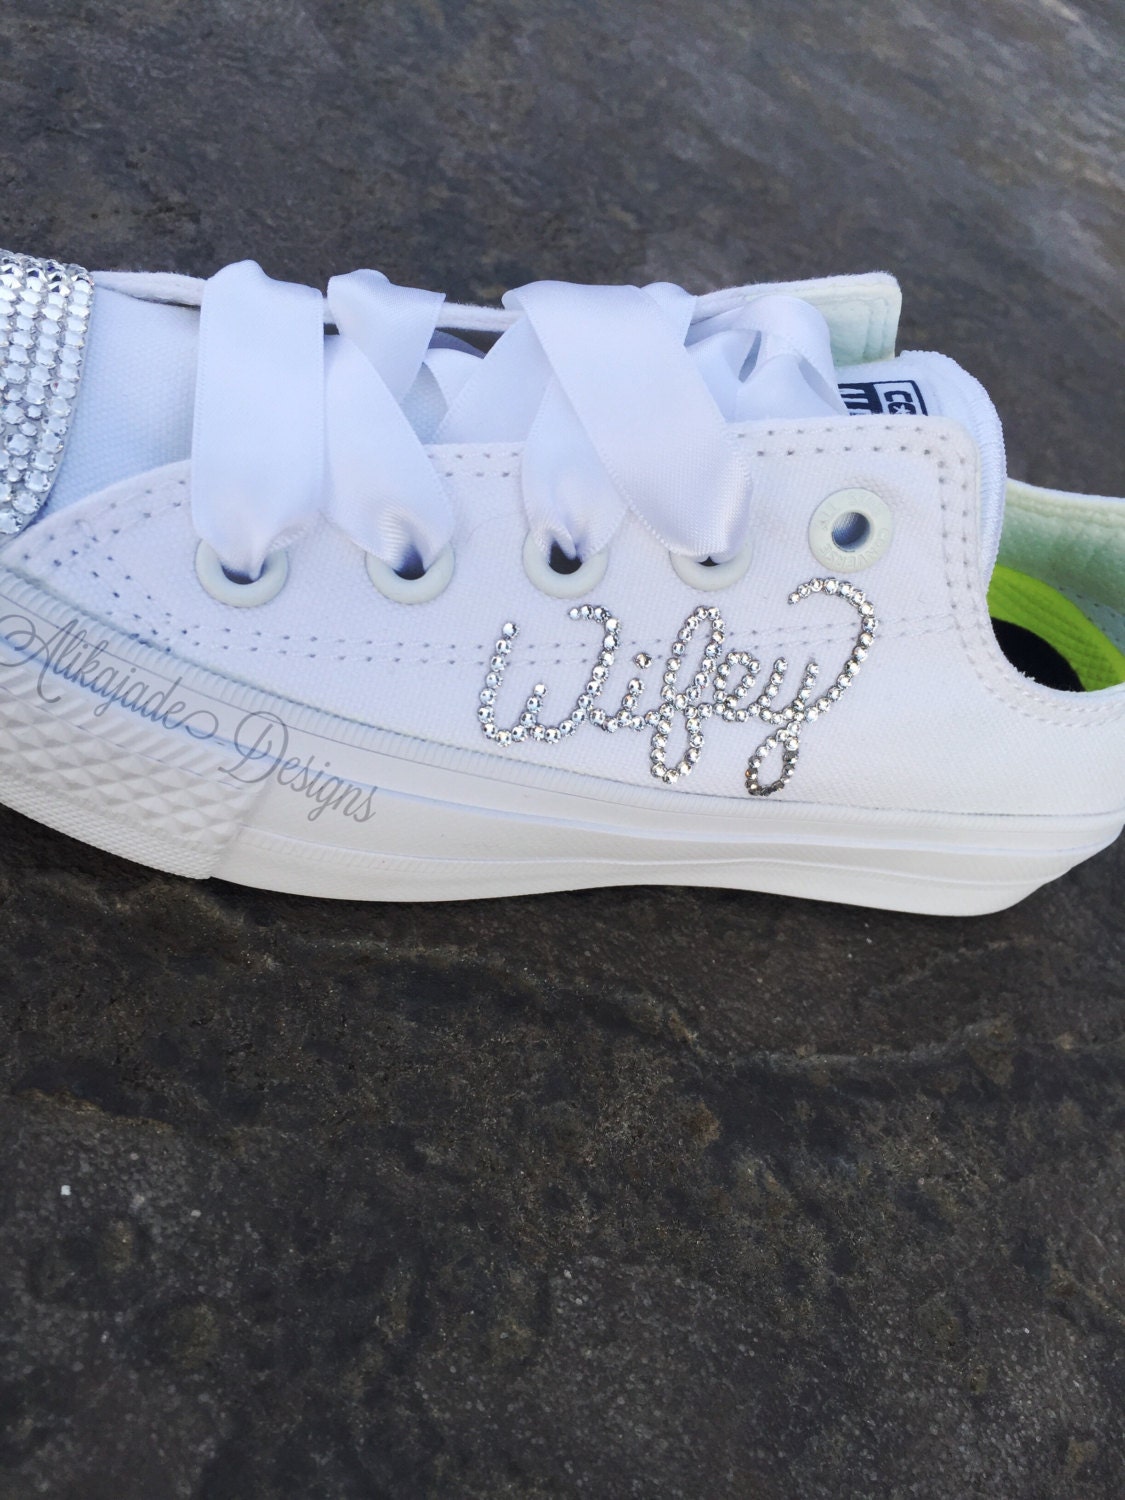 wifey converse shoes